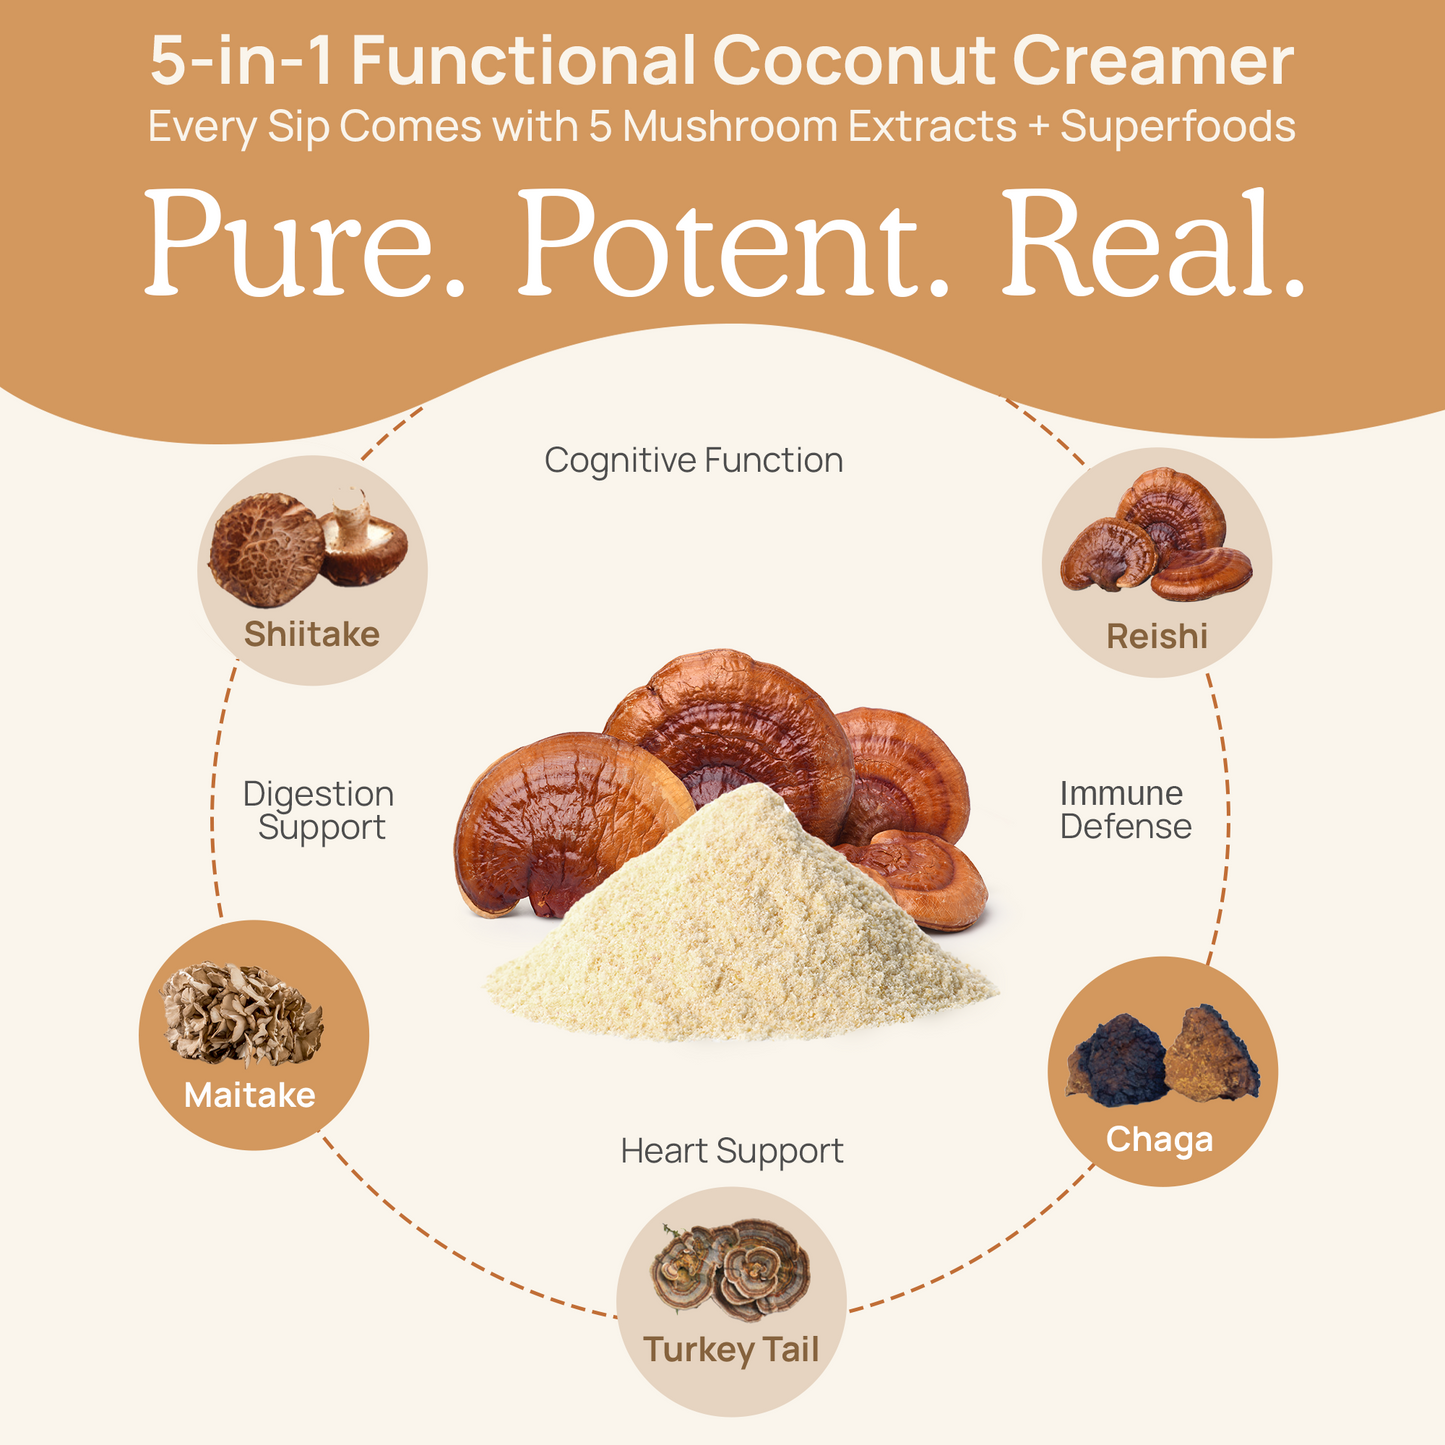 Real Mushrooms USDA Certified Organic 5 in 1 Functional Coconut Creamer - Powder made with organic mushroom extract blend.